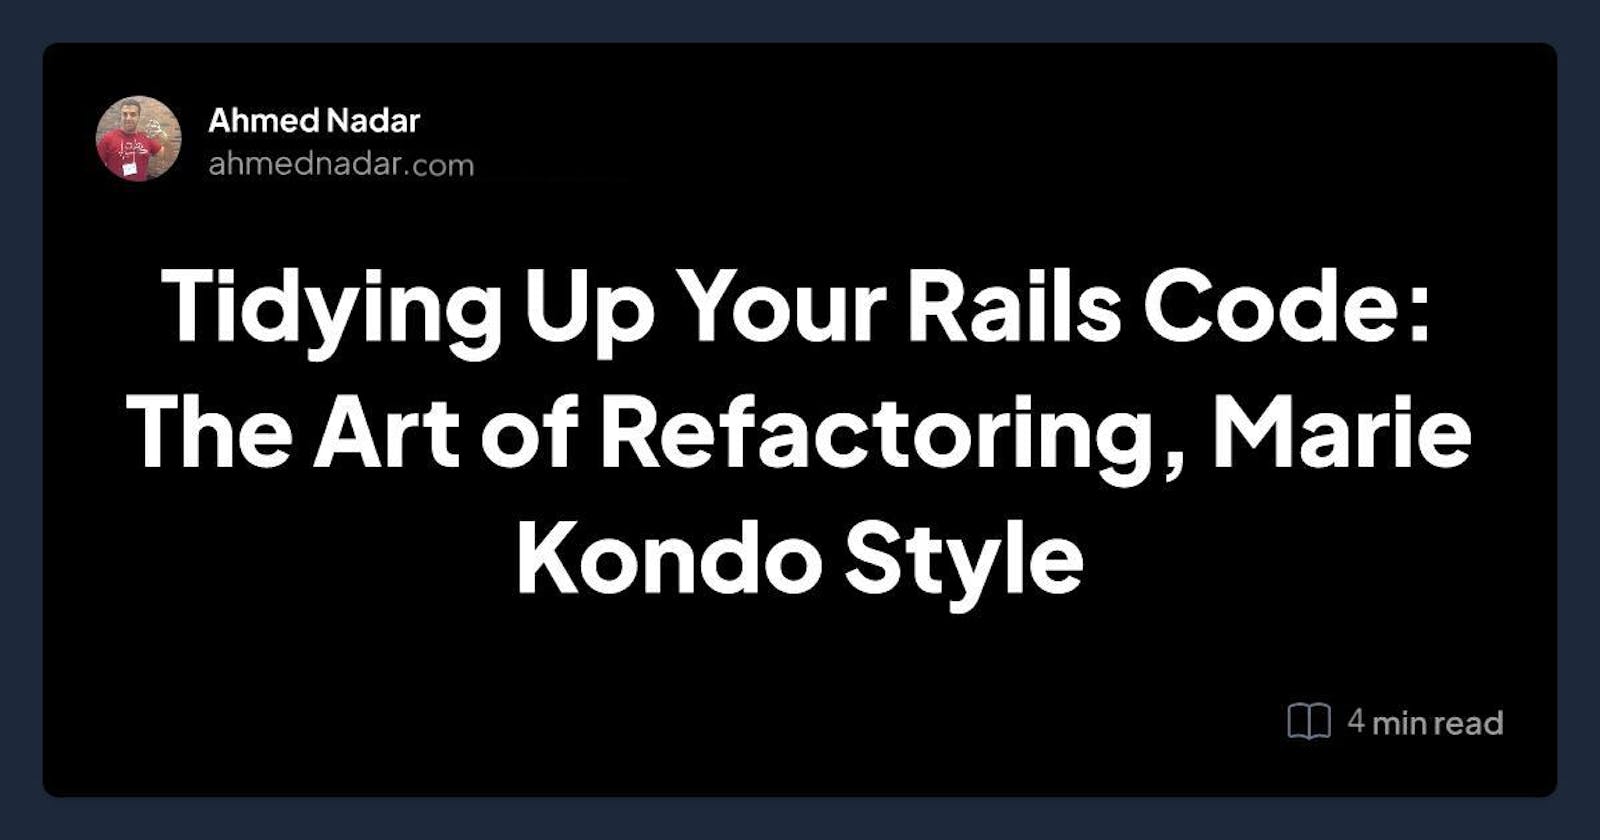 🧹 Tidying Up Your Rails Code: The Art of Refactoring, Marie Kondo Style